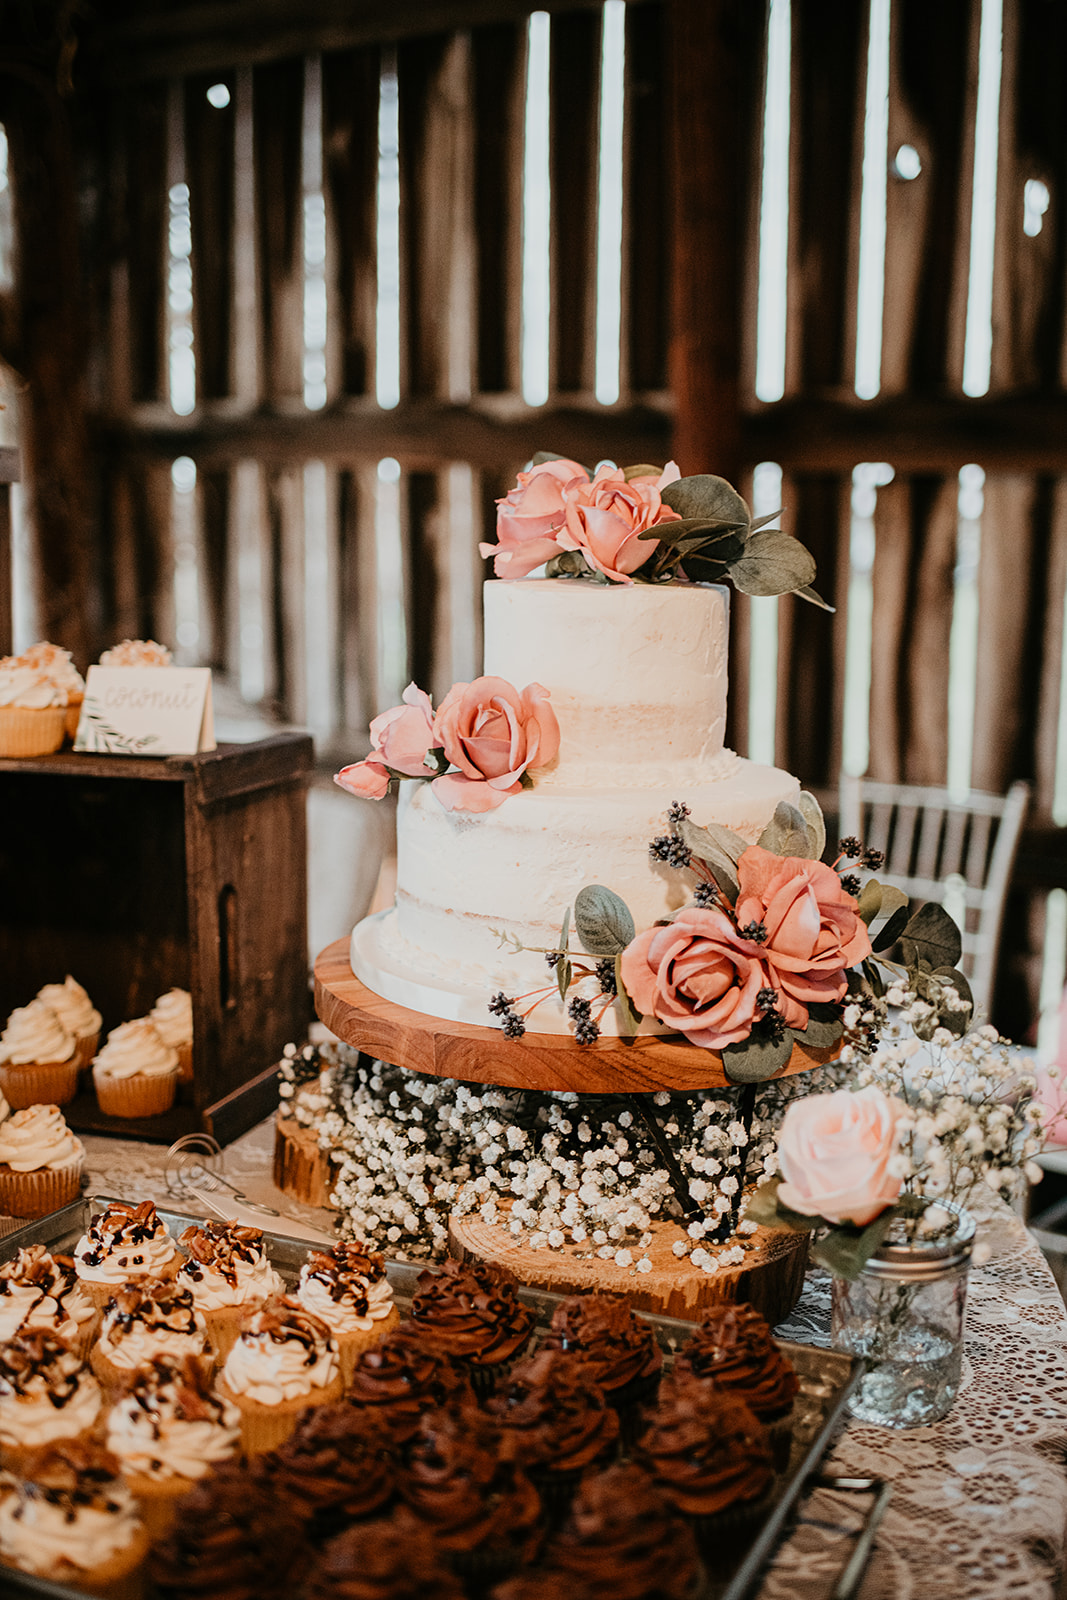 Rustic wedding cake with pink flowers